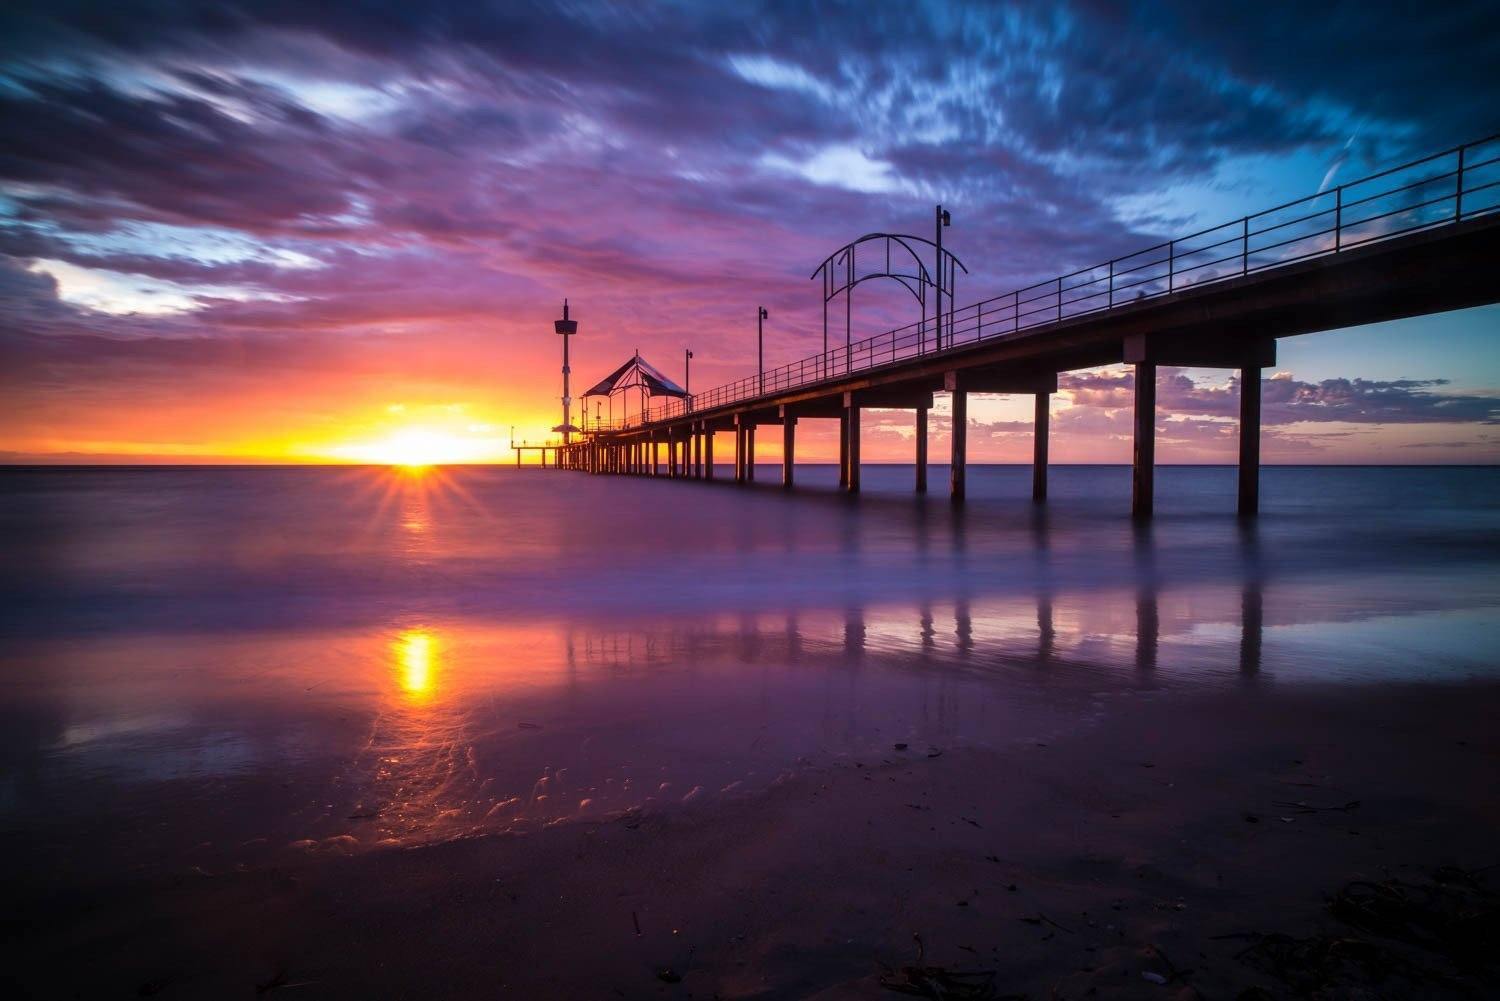 A long-shot view of an over-water bridge with its pillar in the water, some people waling on the bridge, and a tent is installed depicting a little cafe on the bridge, and a sunset effect forming a yellowish effect on the picture, Brighton Jetty Sunset - Adelaide SA